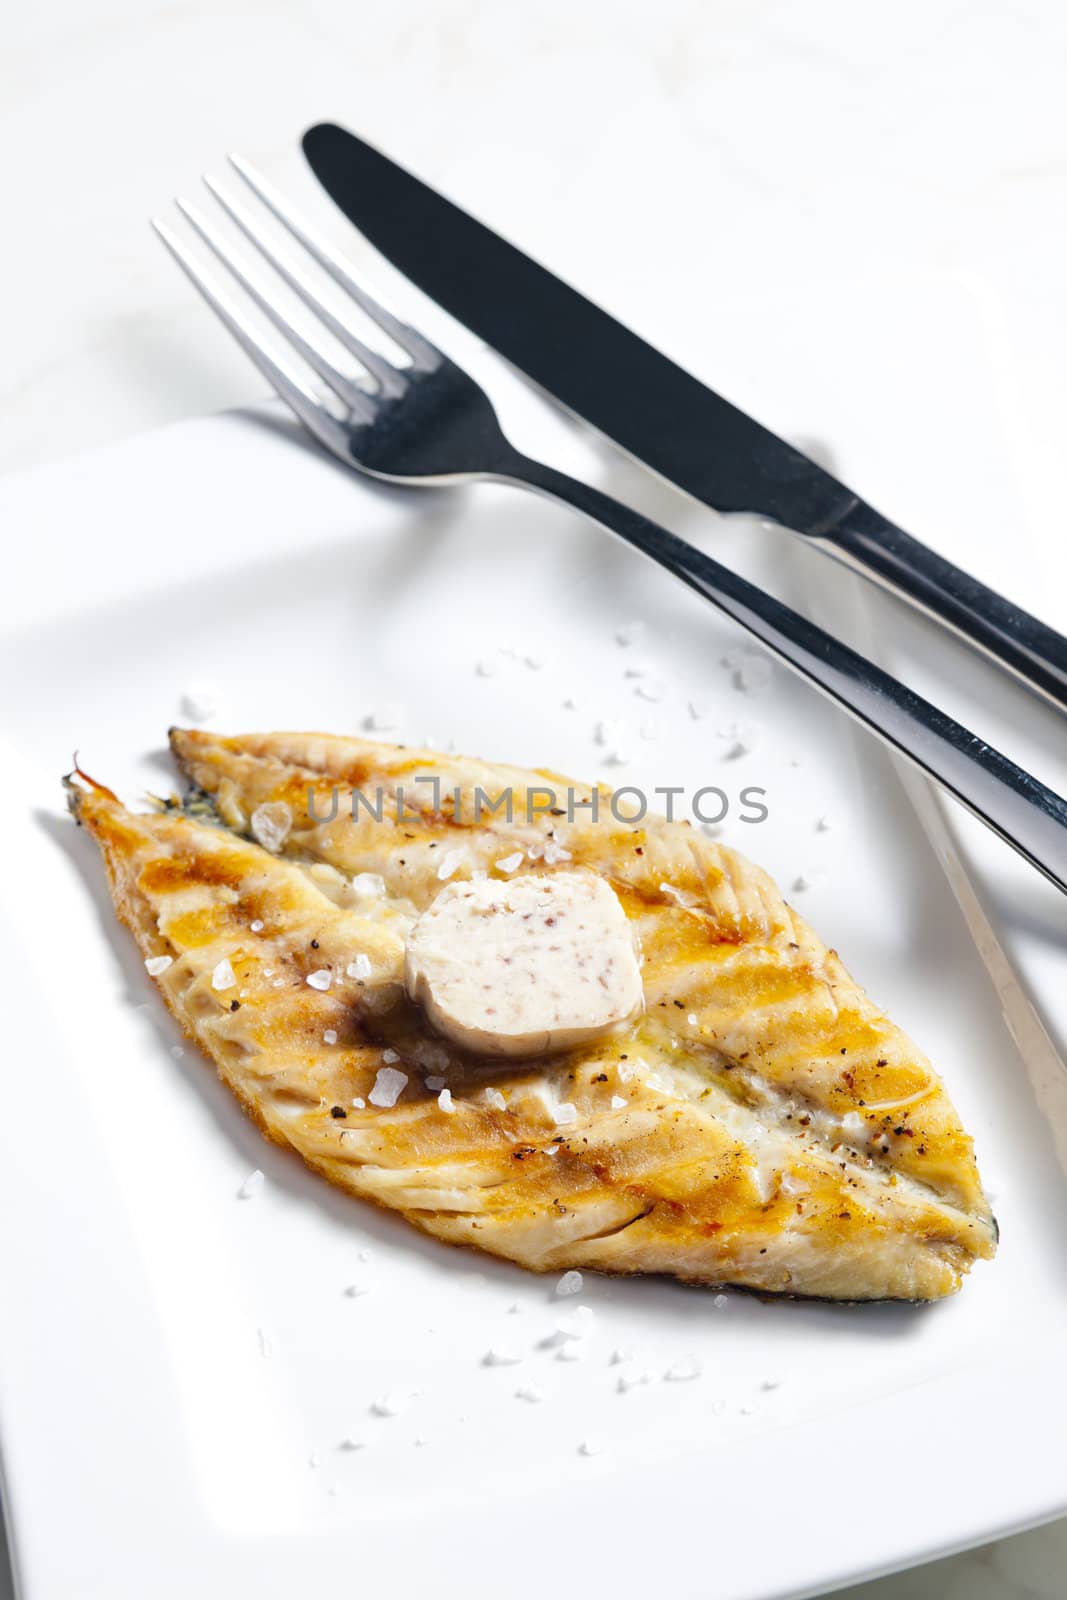 grilled mackerel with anchovy butter by phbcz